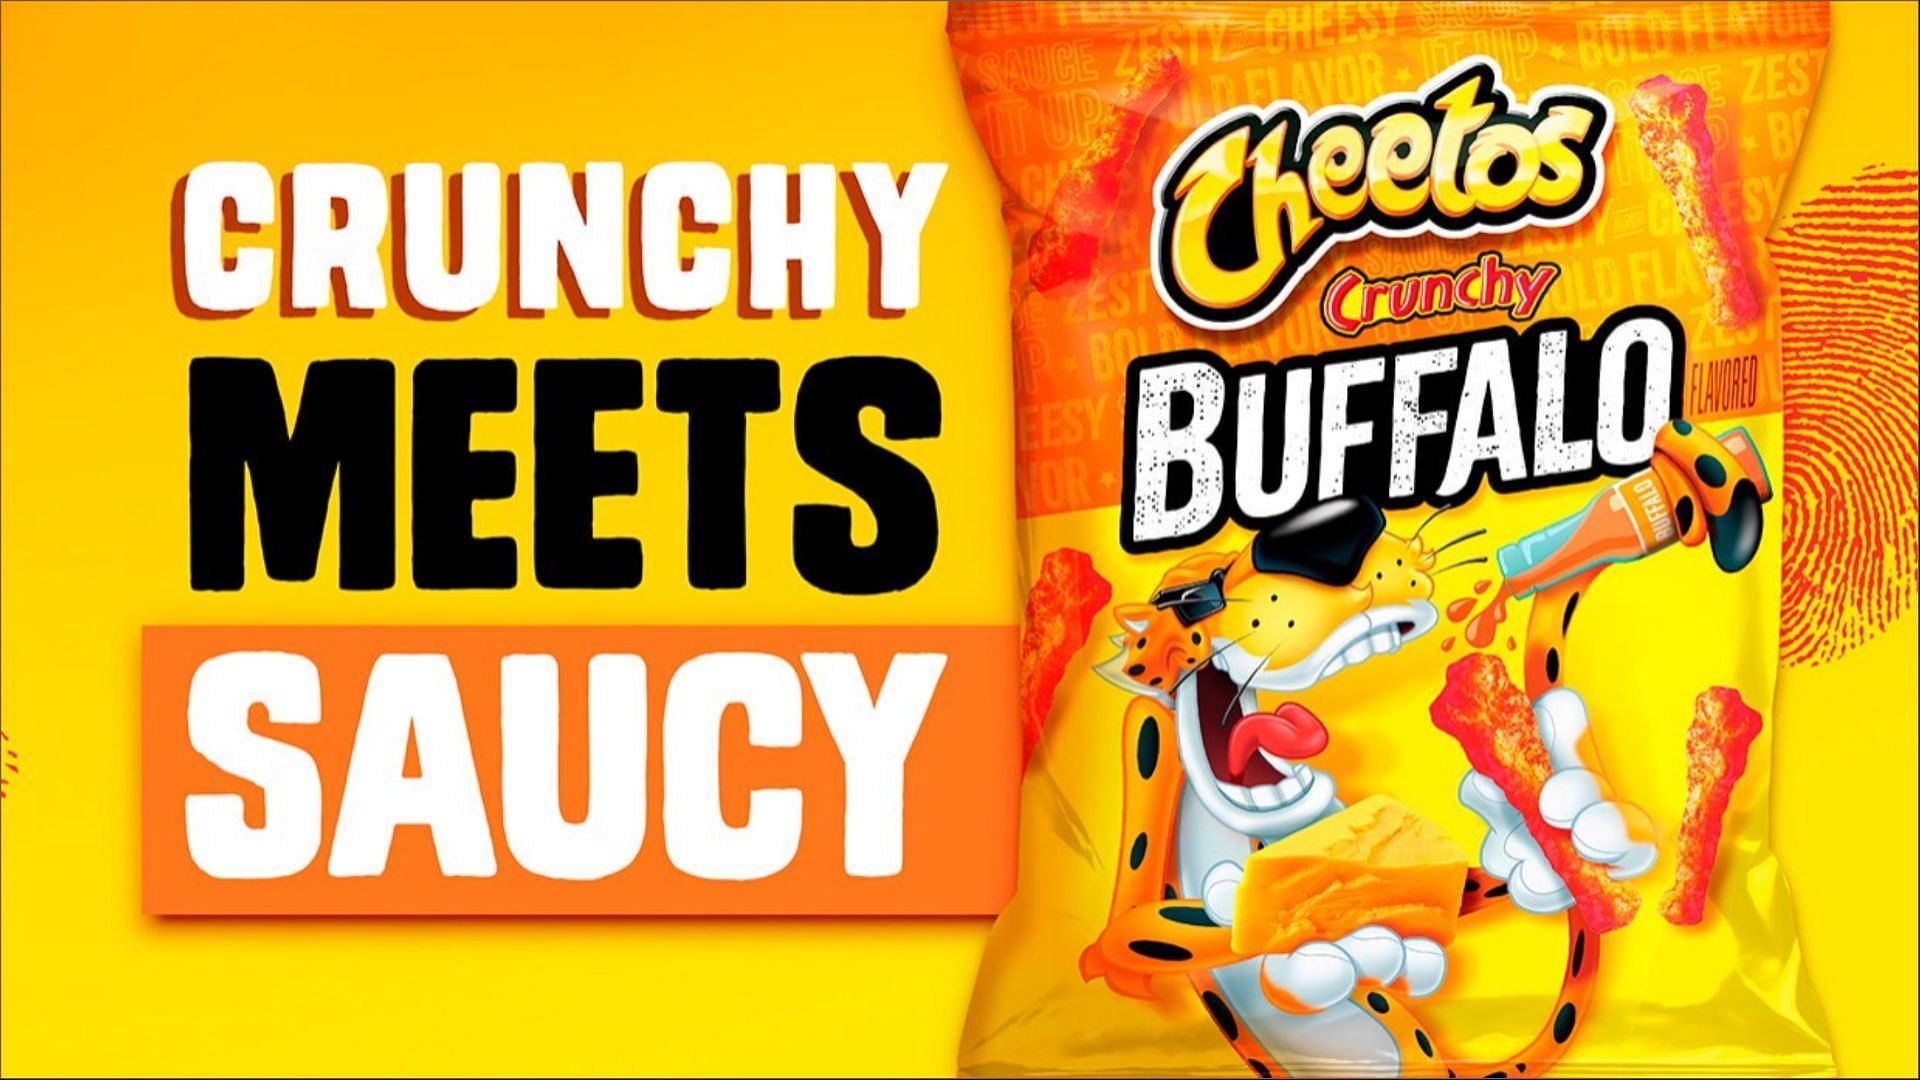 The new Crunchy Buffalo snack is available at Walmart and Target (Image via Cheetos)